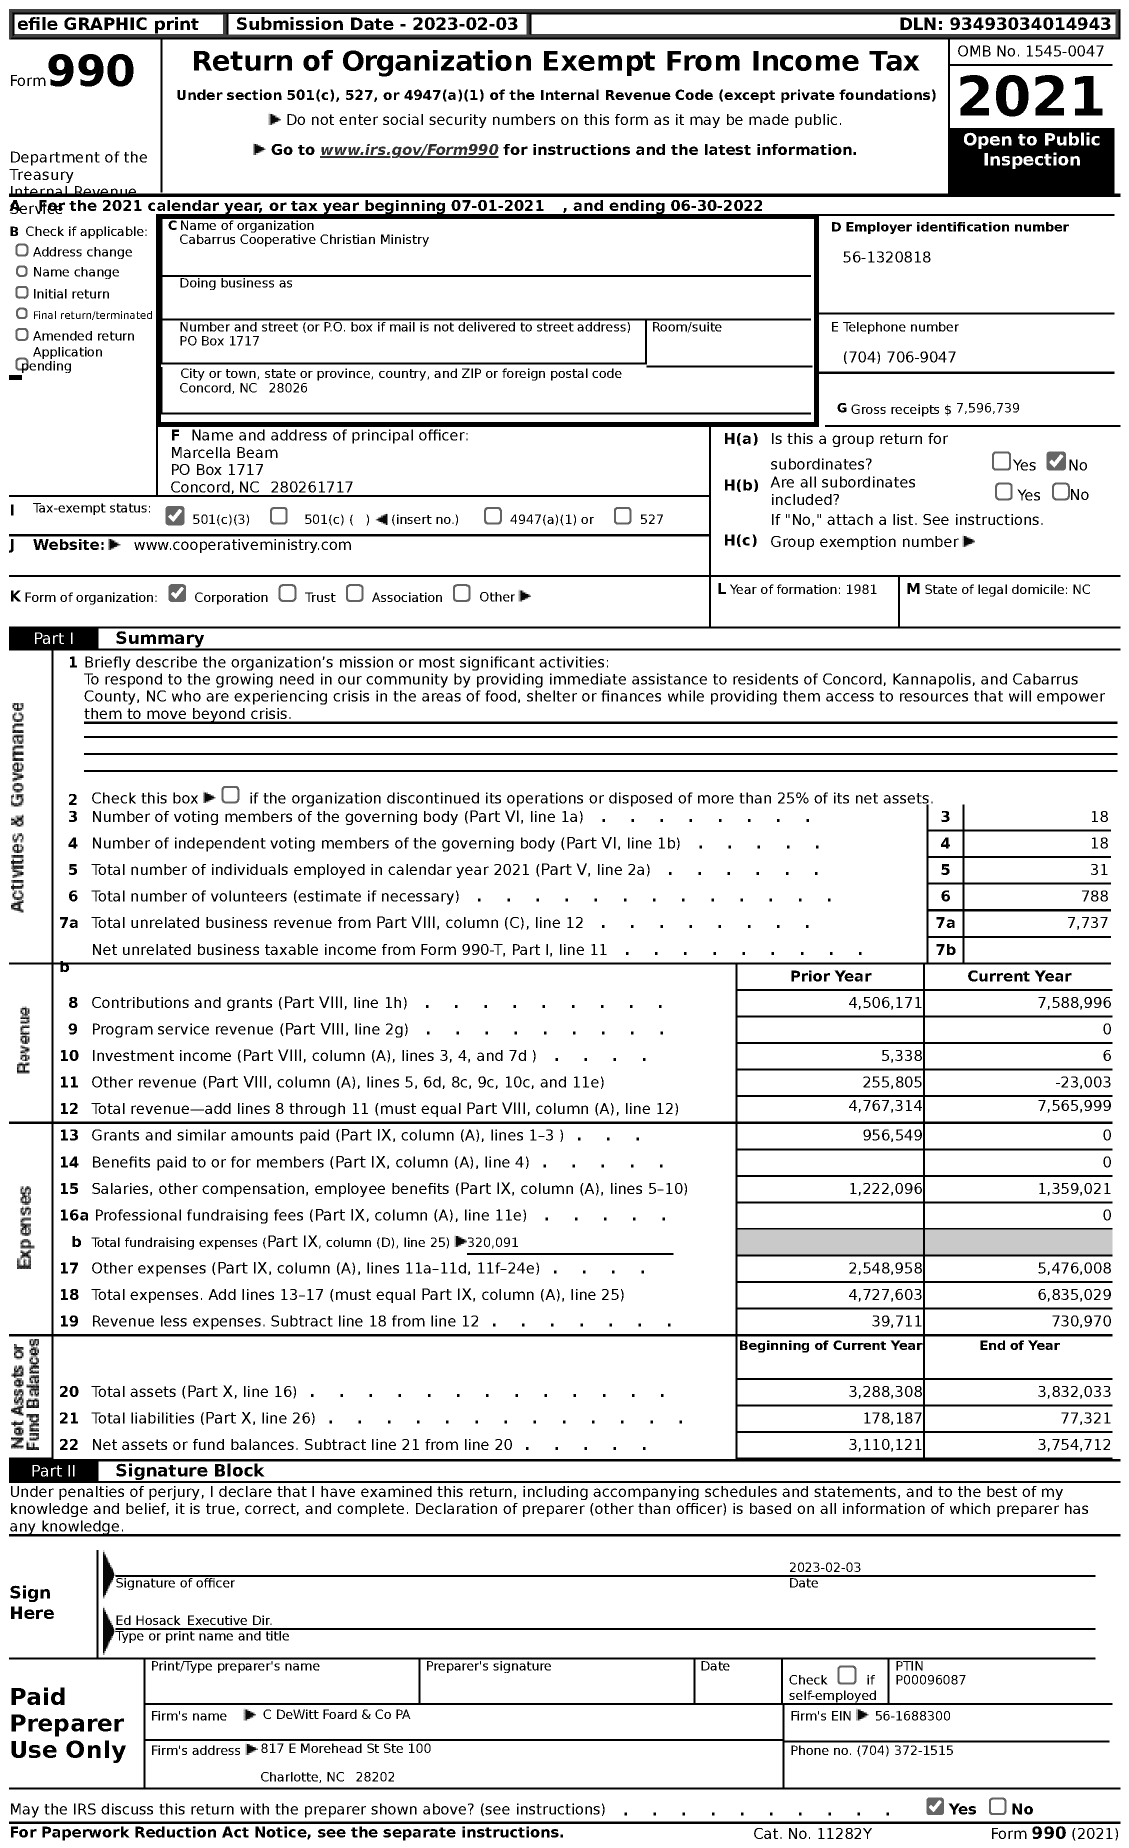 Image of first page of 2021 Form 990 for Cabarrus Cooperative Christian Ministry